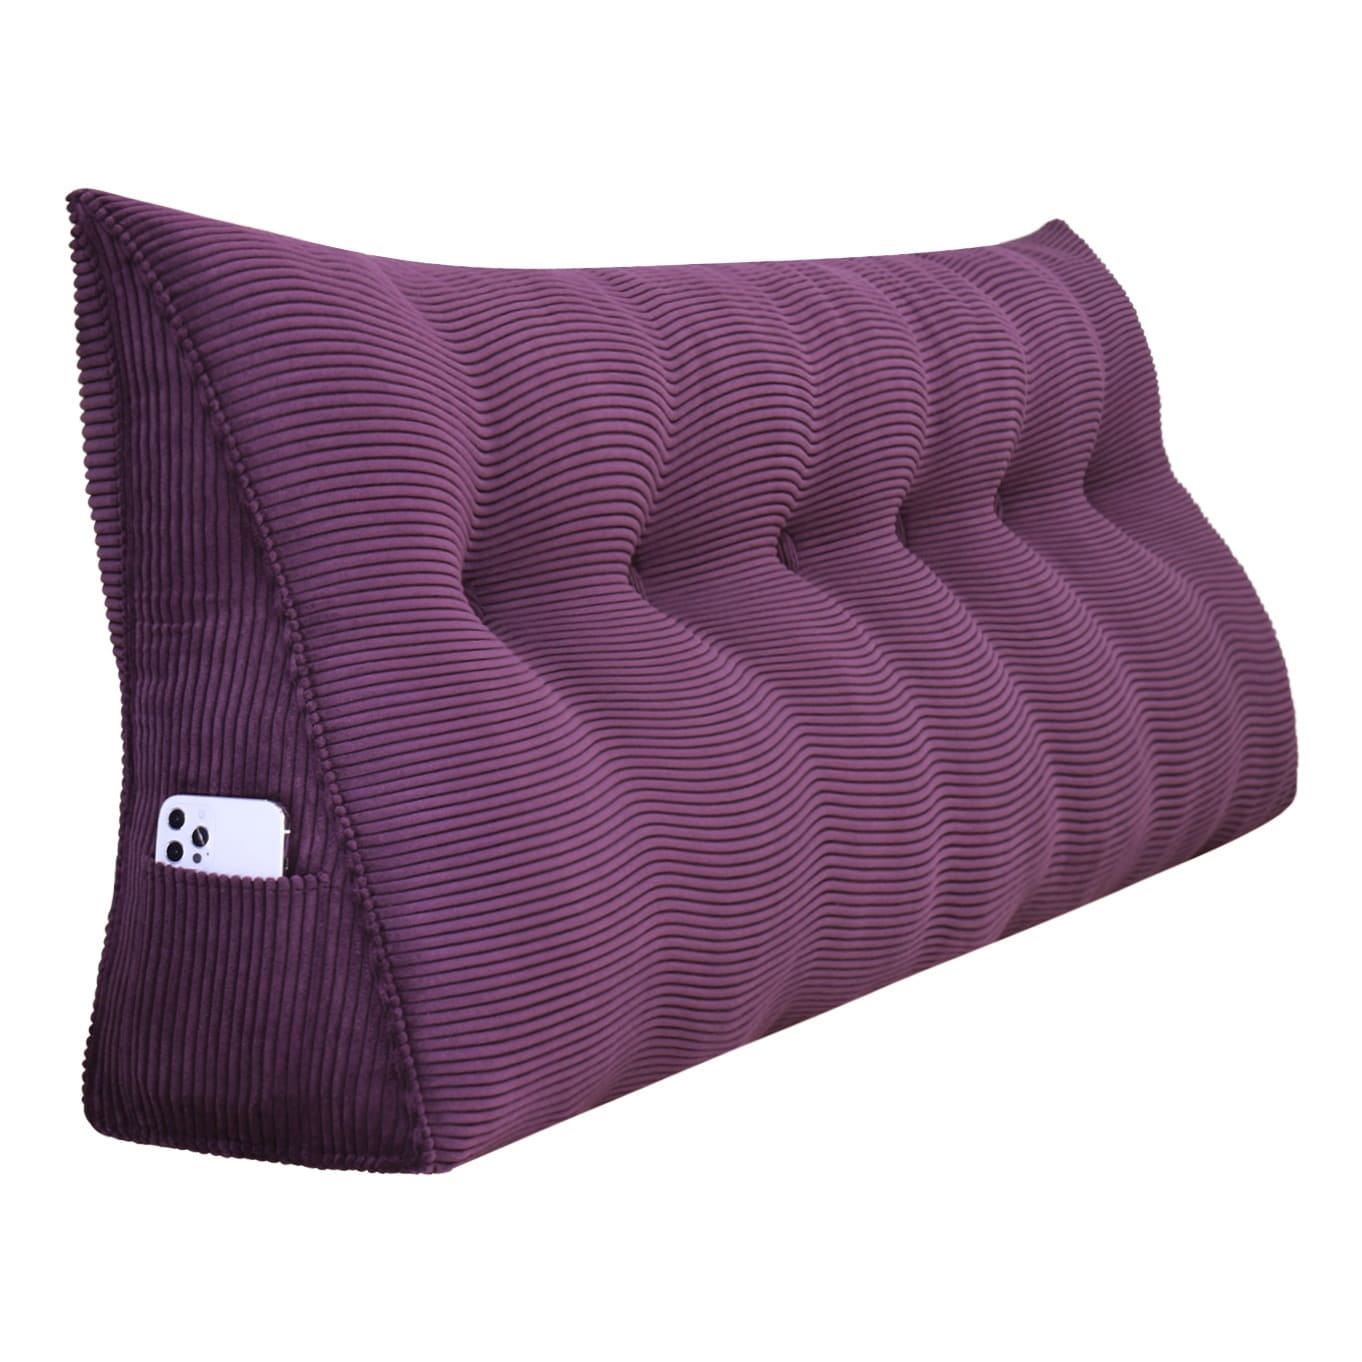 Home Decor Bed Cushion Bed BackrestVelvet Back Cushion European style bed  decor ruffles pad cushion Violet lazyback Buttons - AliExpress